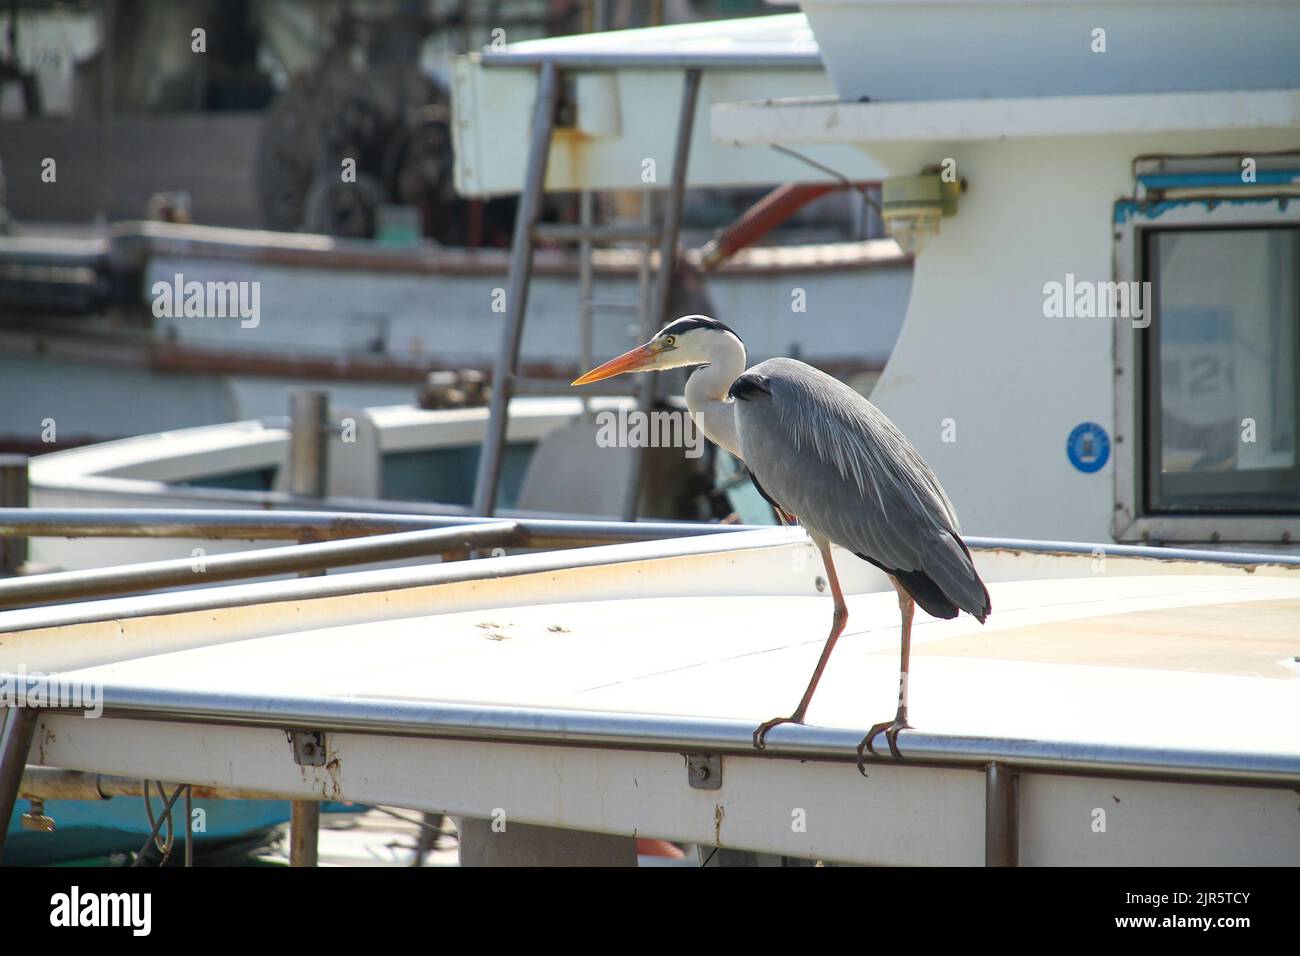 One heron standing on the boat Stock Photo